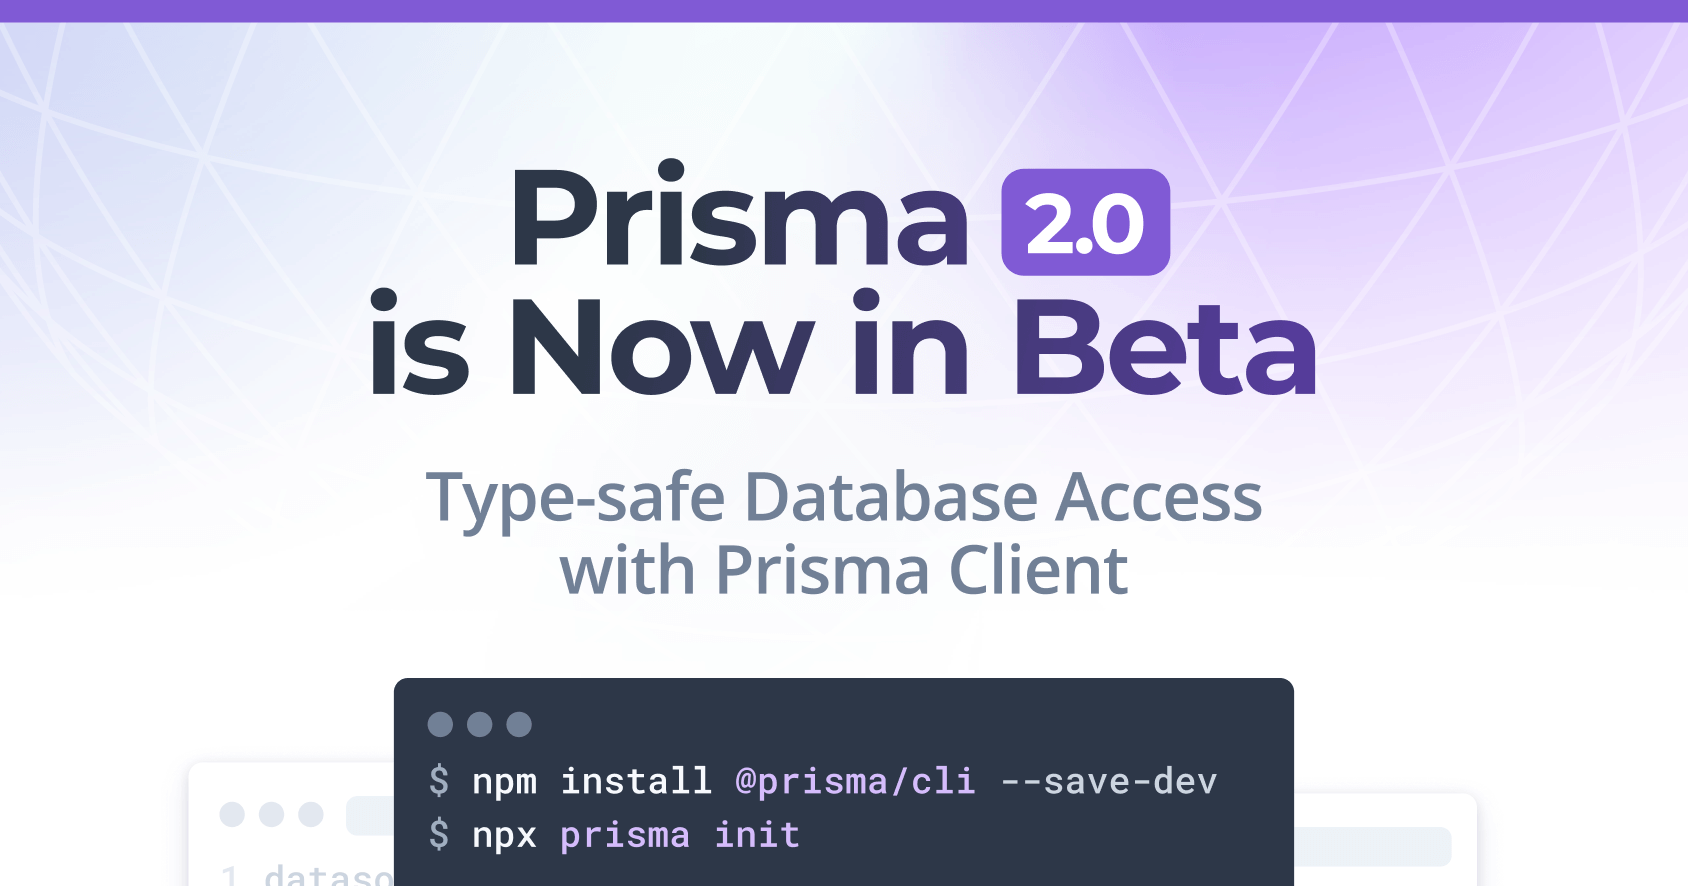 Prisma 2.0 is now in beta